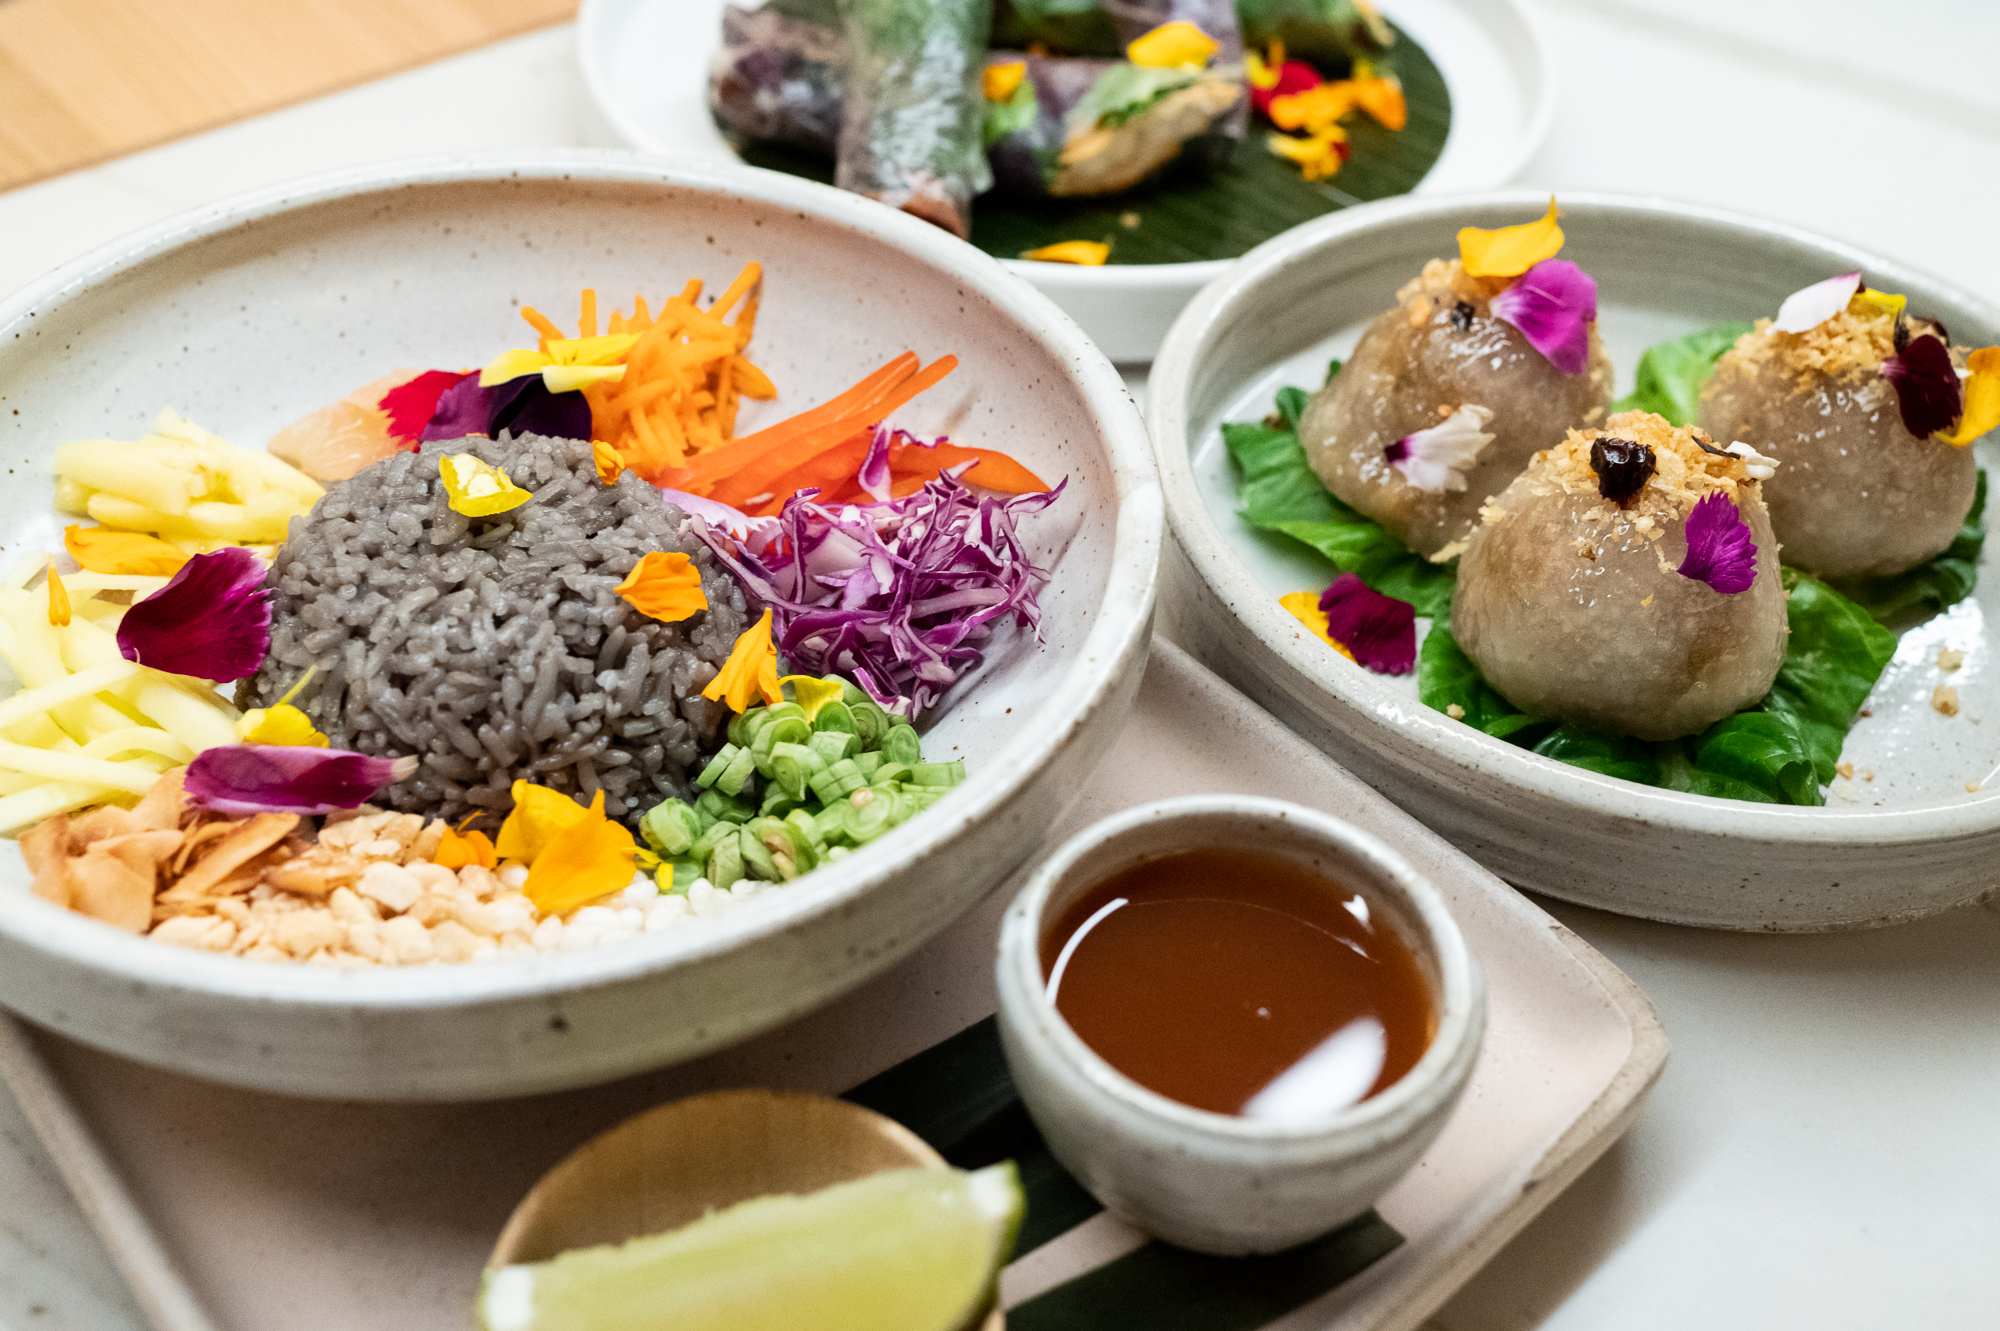 Rainbow rice and sakoo, a type of tapioca dumpling, on plates, with sauce and a lime wedge.